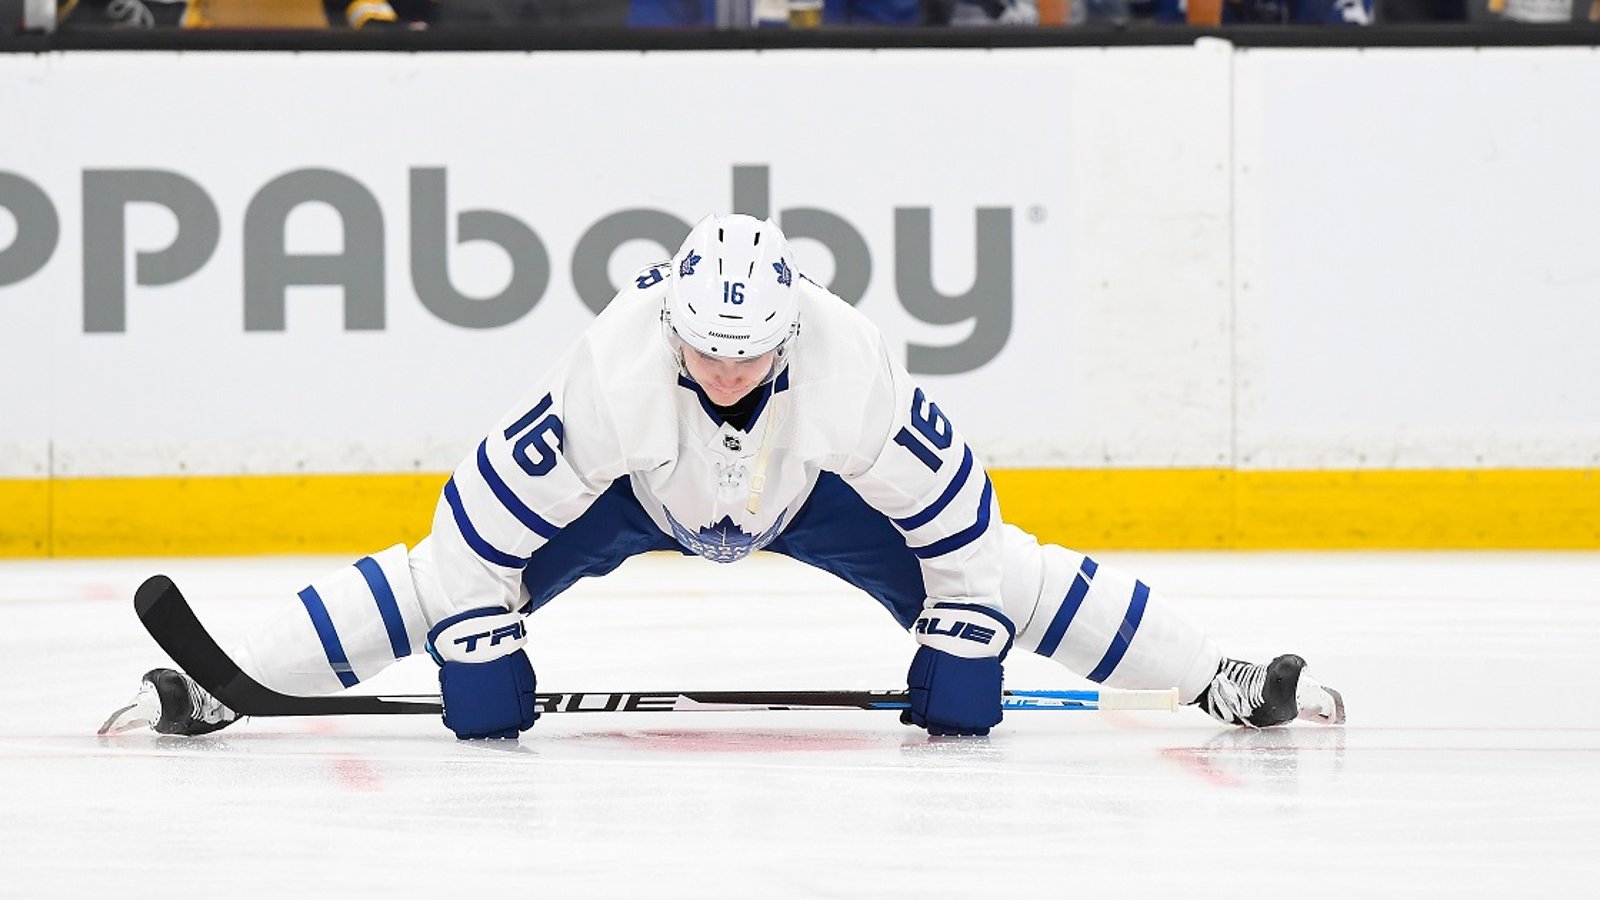 More bad news for Maple Leafs star Mitch Marner.